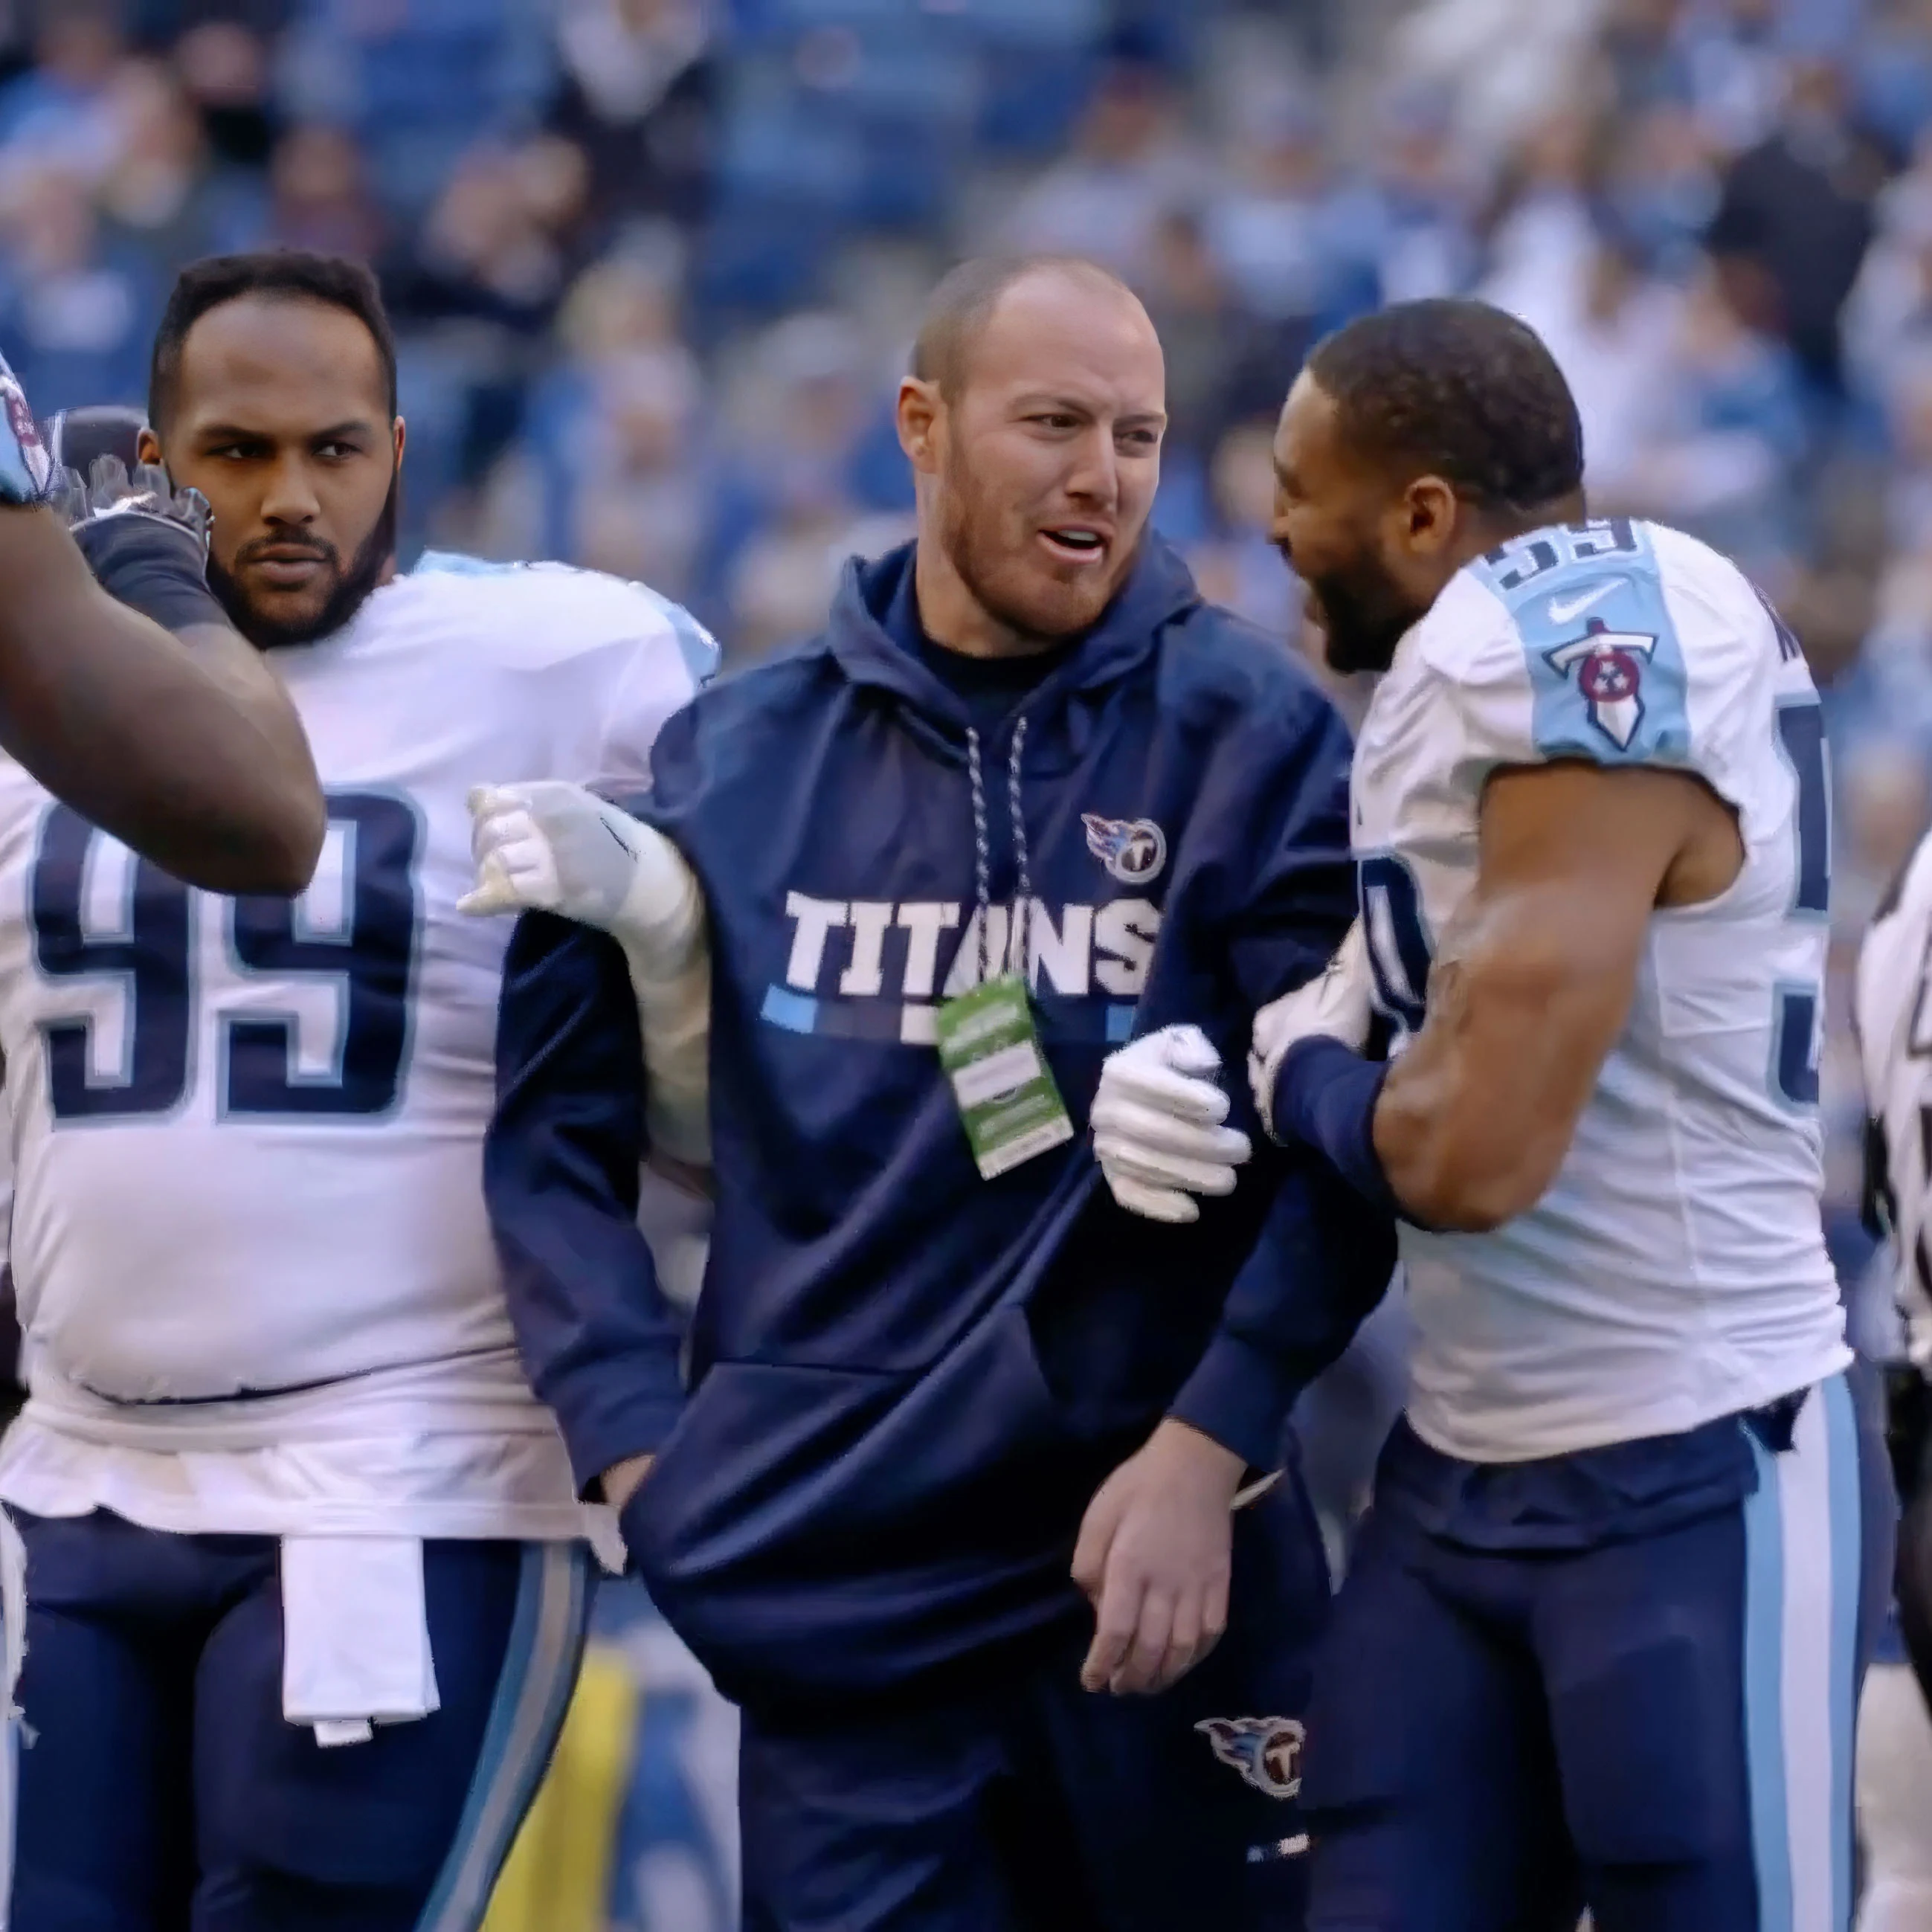 Thumbnail of Tim Shaw, former NFL player, standing in a between two other Titans players at a game.